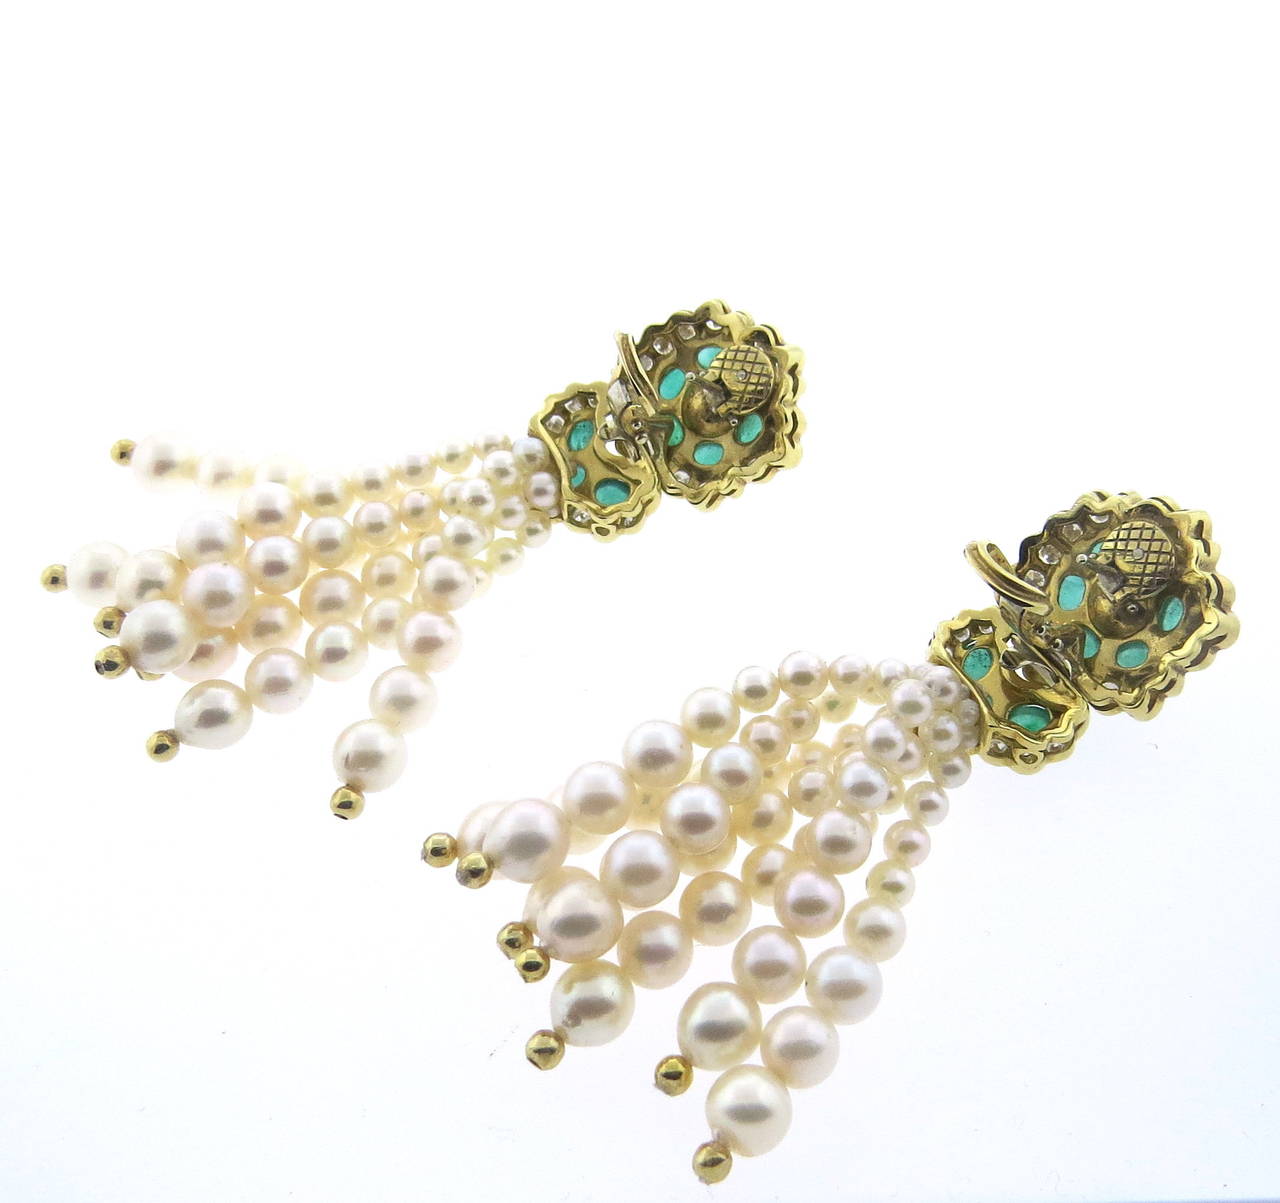 Beautiful 18k gold earrings with emerald cabochon diamond top and  graduated pearls tassel drops. Approx. 3.60ctw diamonds and 5.00ctw eameralds.Earrings measure 76mm x 22mm,. Weight - 62.1 grams